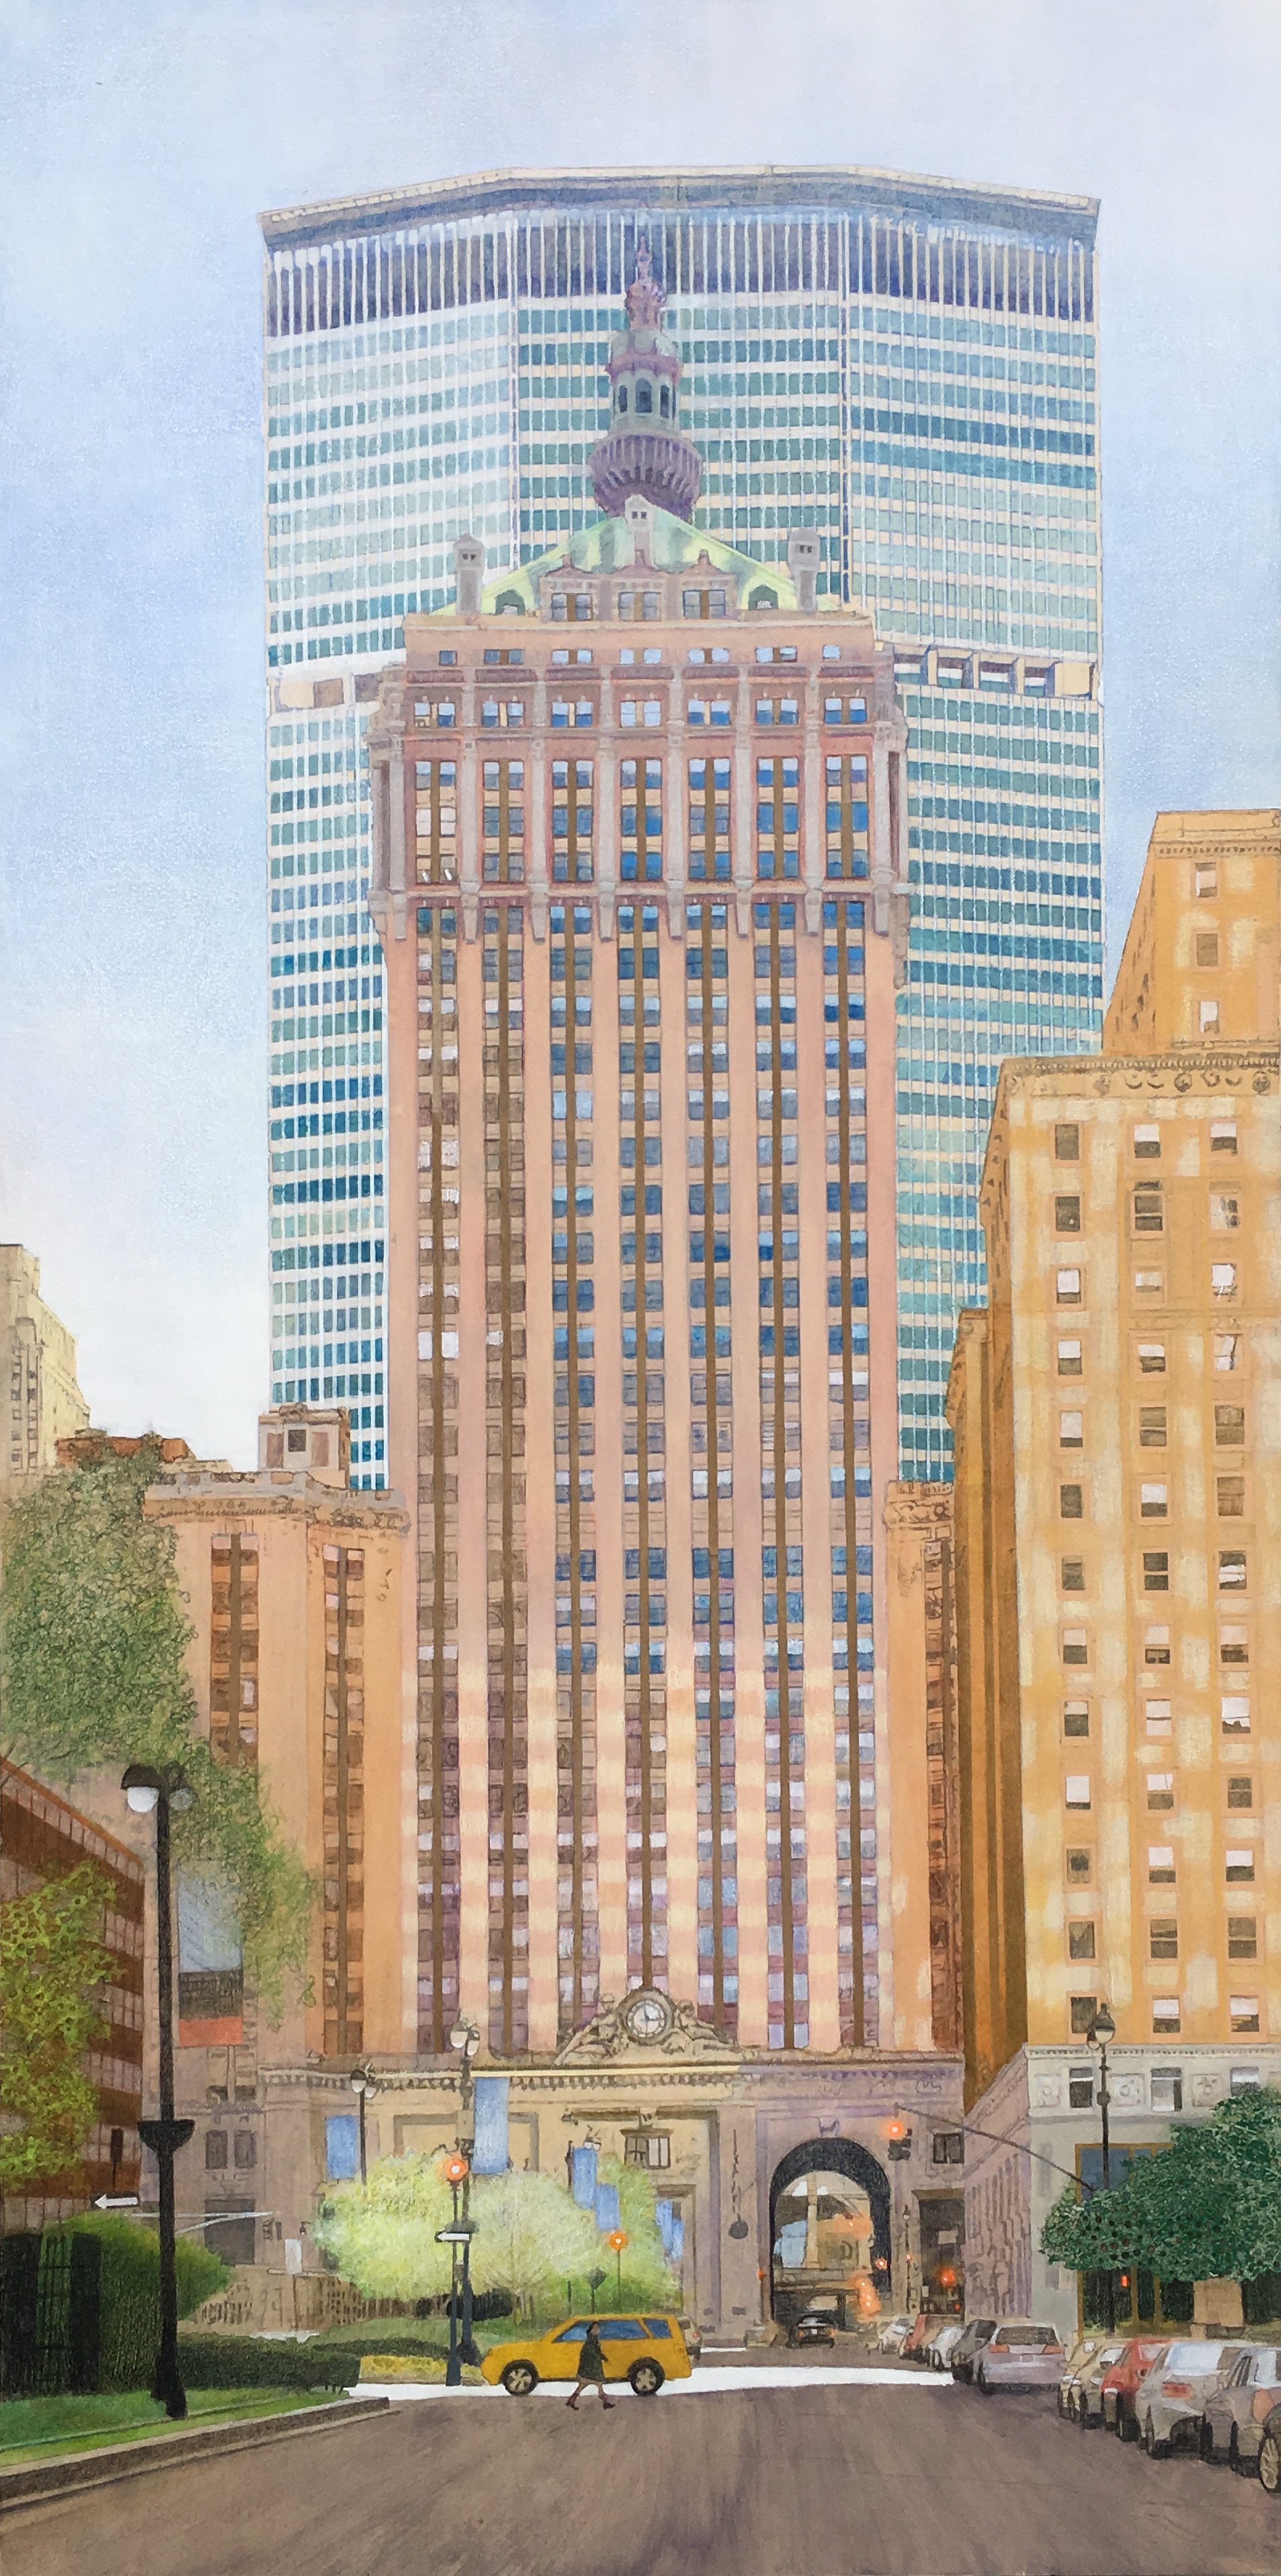   Crossing Park Avenue     30”x 60” Mixed Media on Wood Panel 